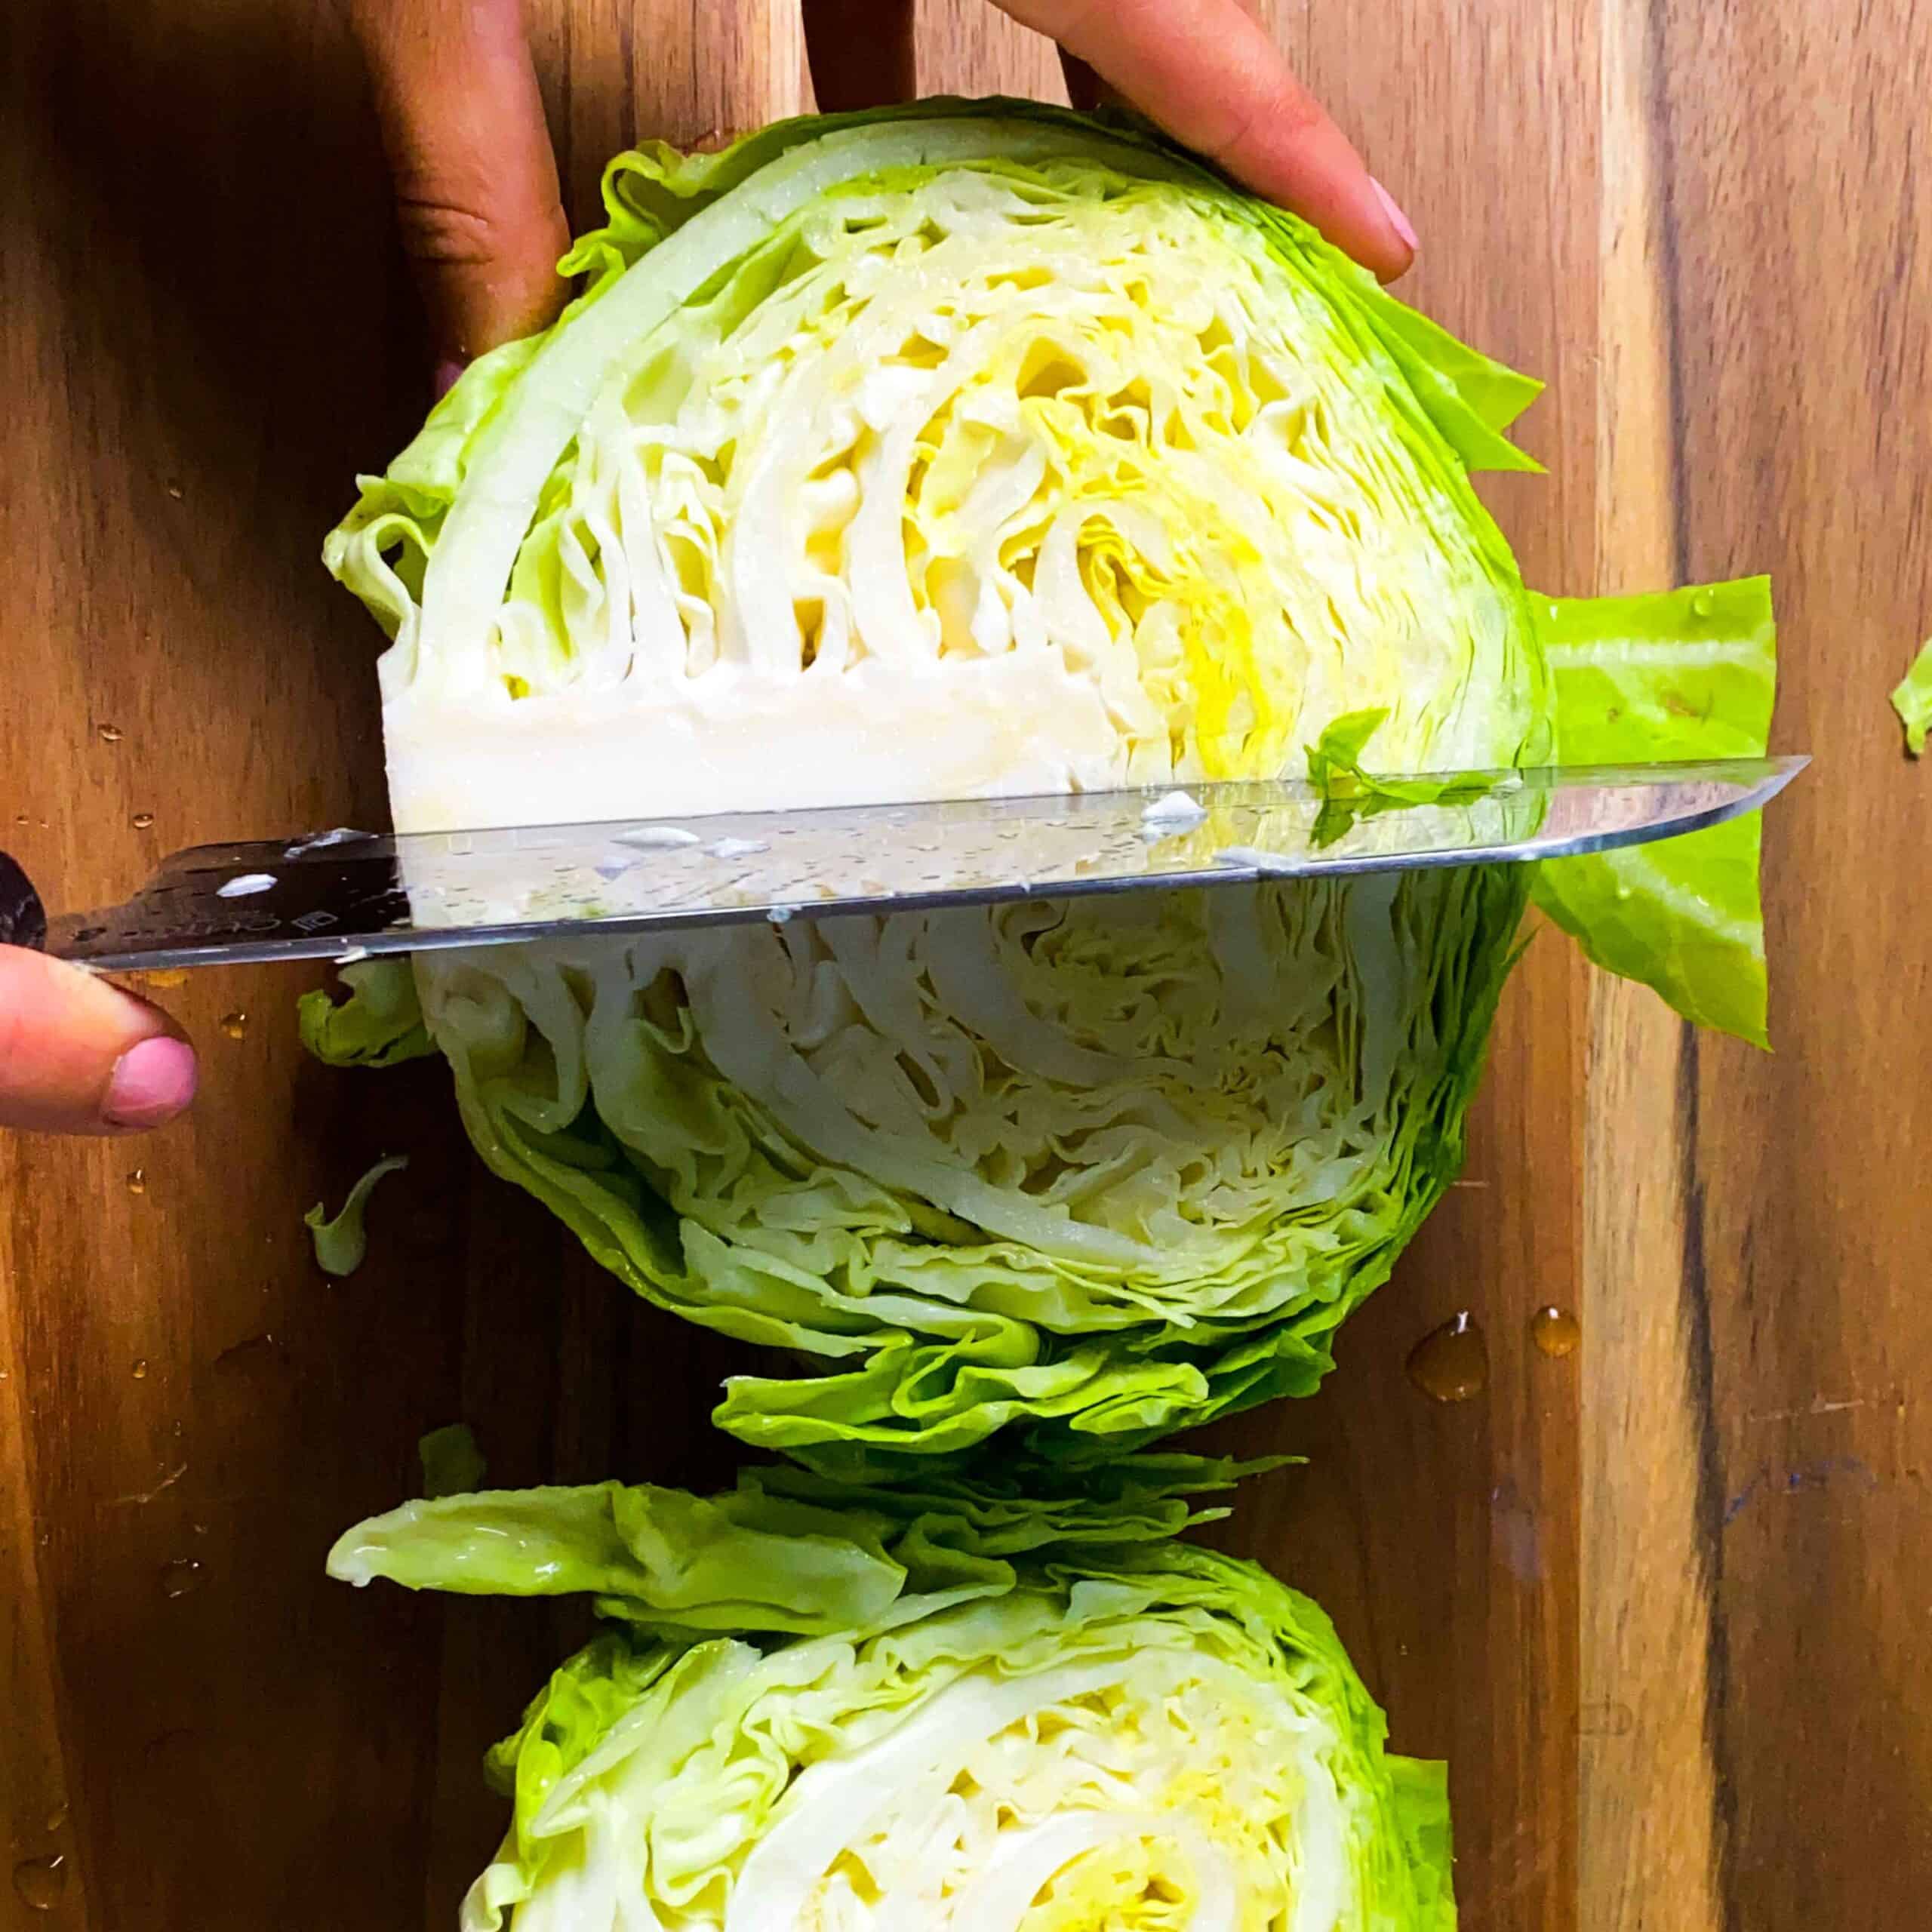 Whole cabbage head being cut in quarters on a wooden cutting board.